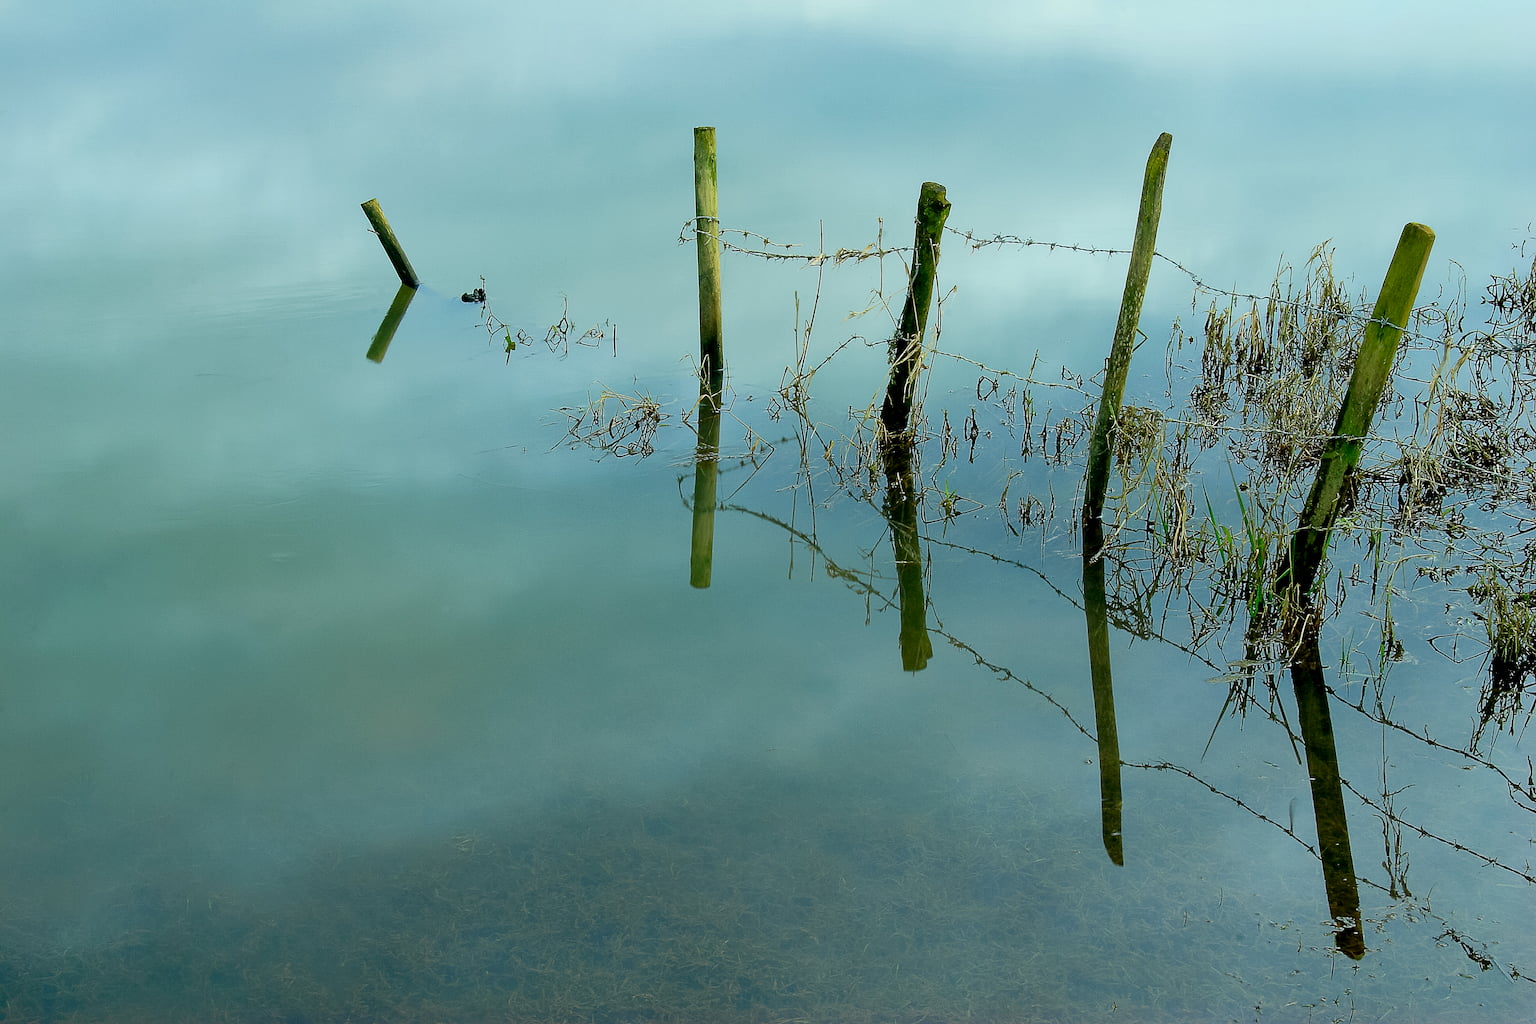 Refelctions of fence in the water at The Ouse Washes, near Sutton Gault in Cambridgesire.